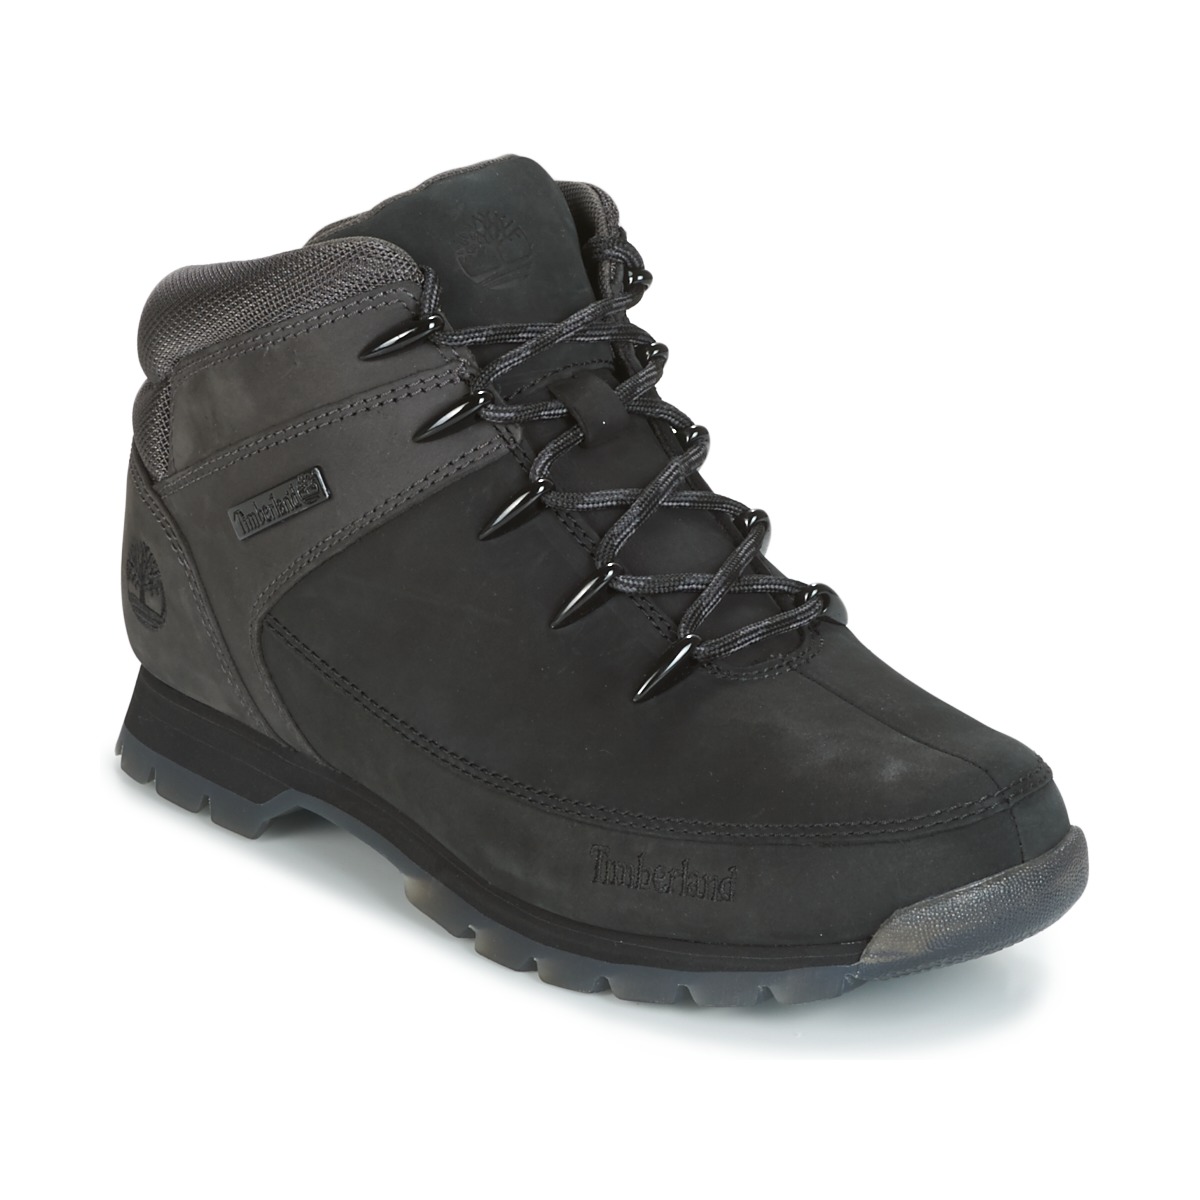 Timberland EURO SPRINT HIKER Black / Grey - Fast delivery